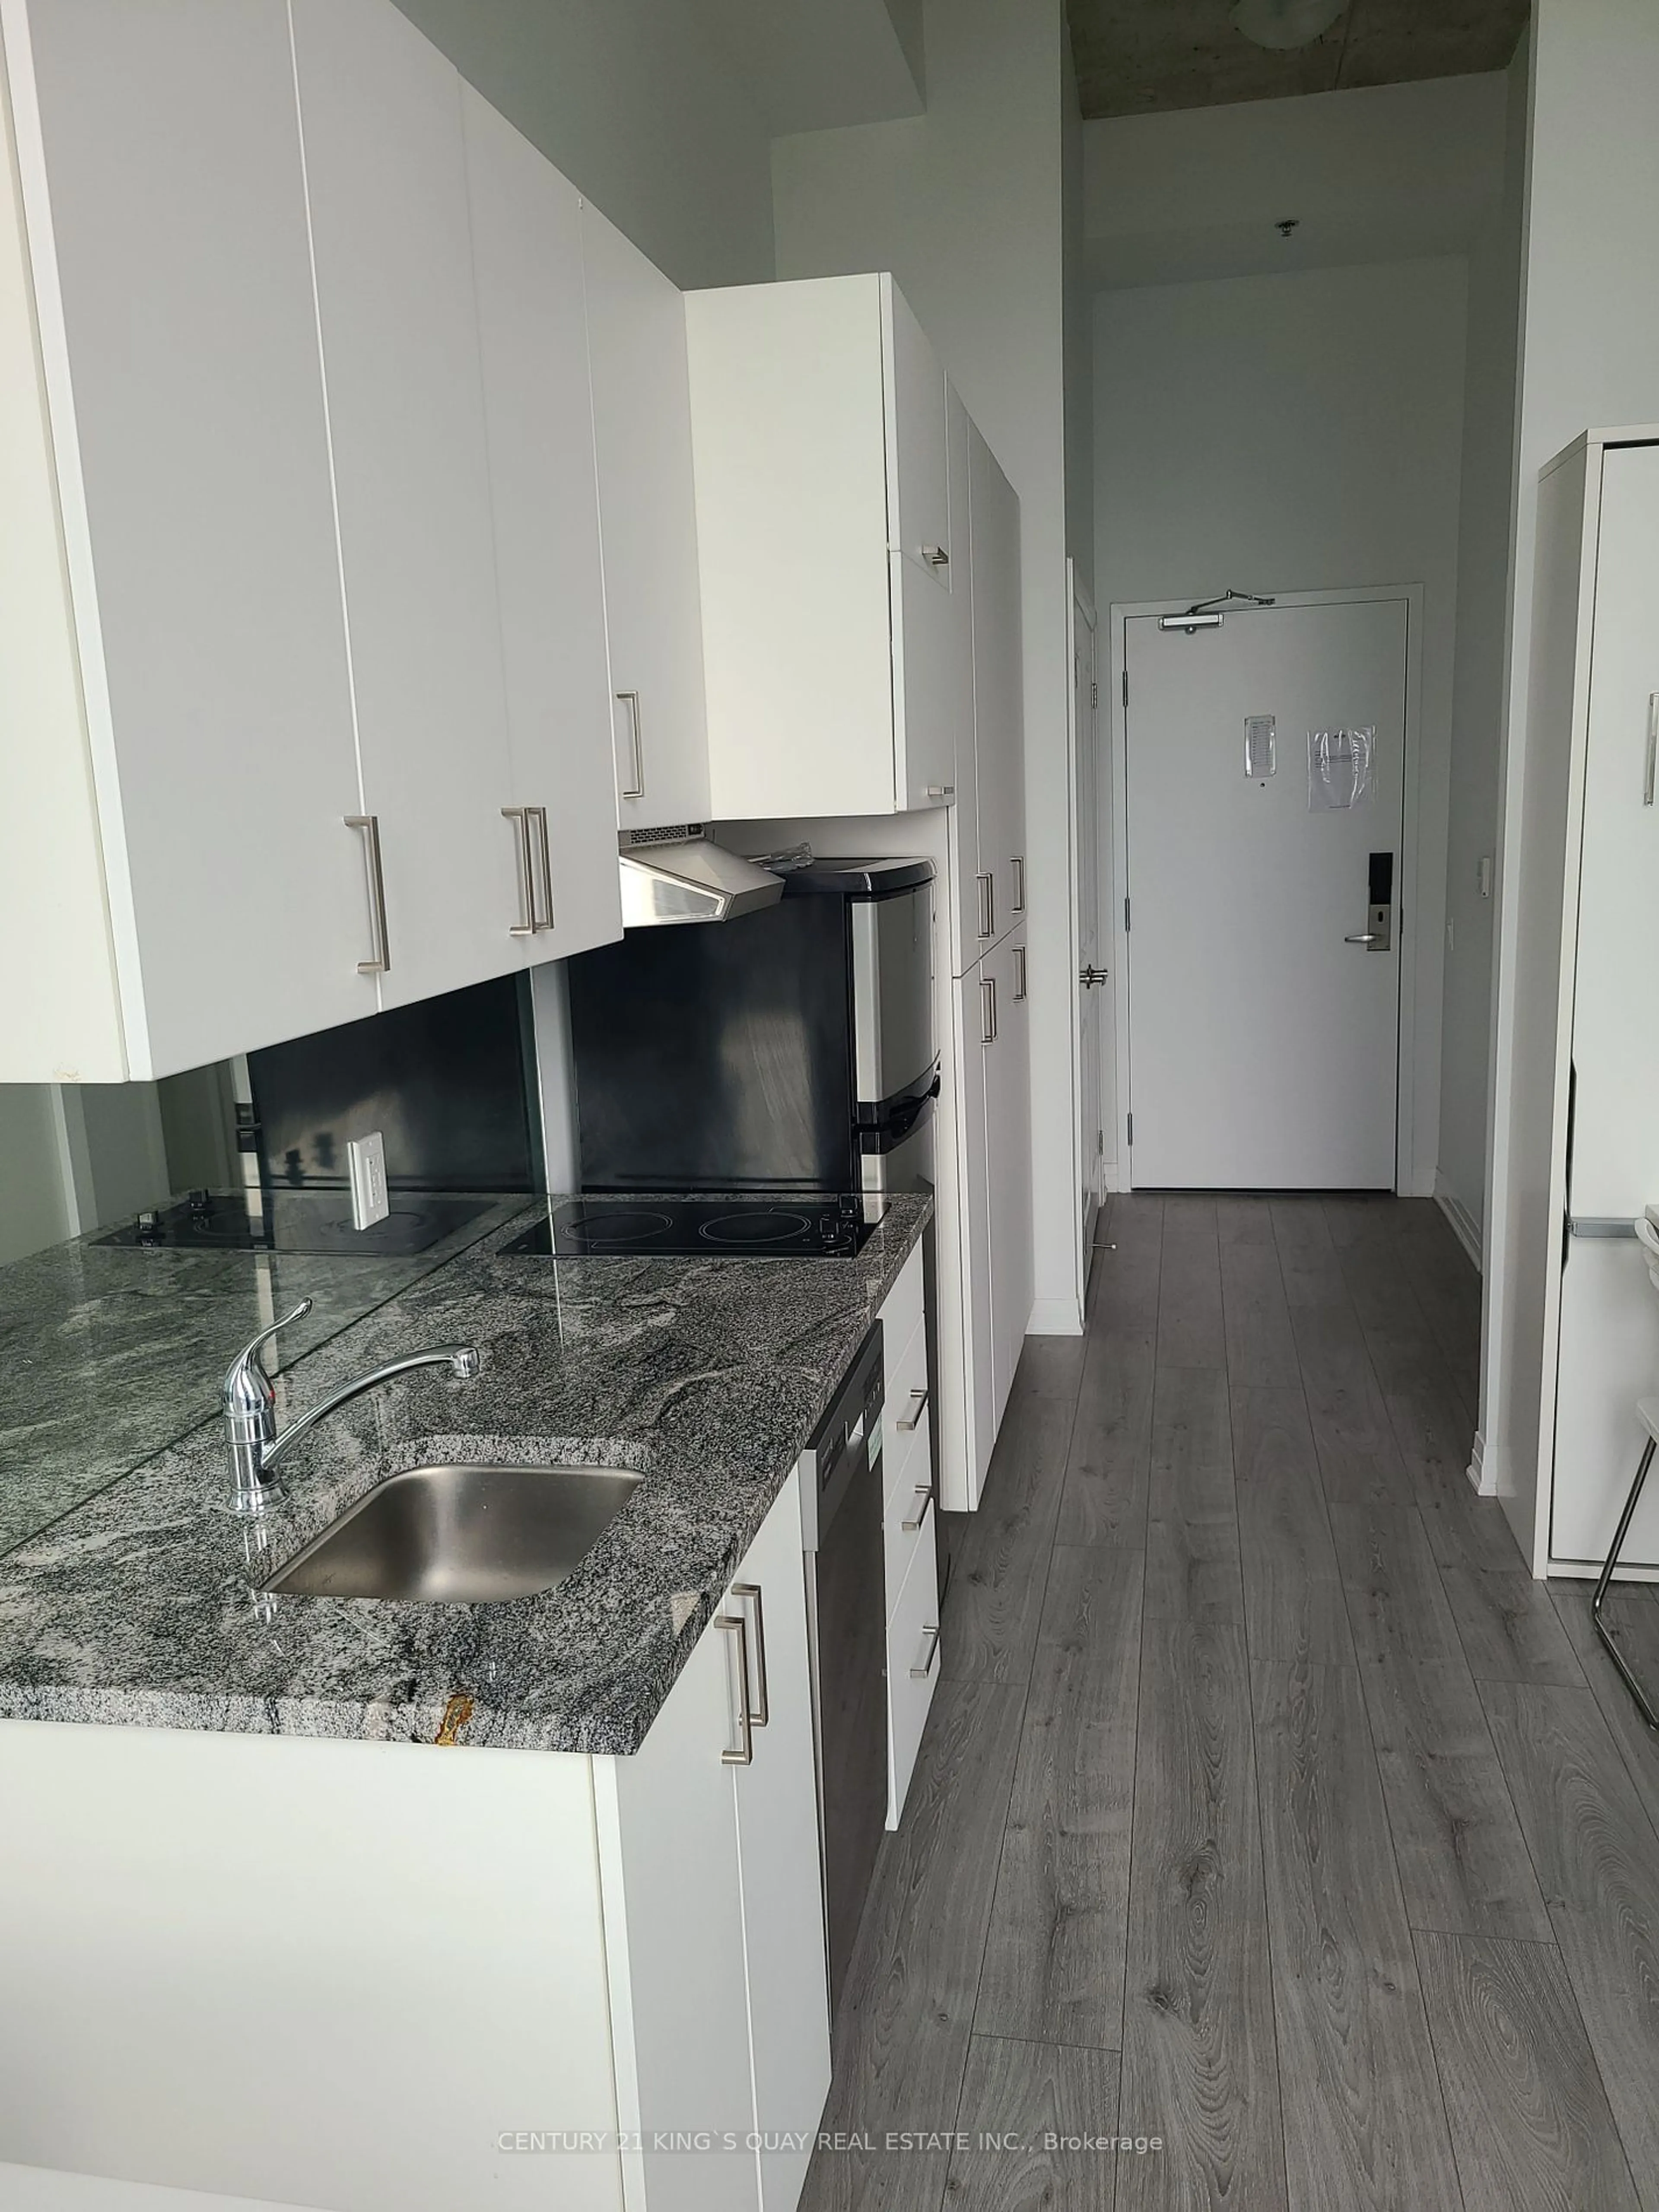 Standard kitchen for 1900 Simcoe St #523, Oshawa Ontario L1G 4Y3